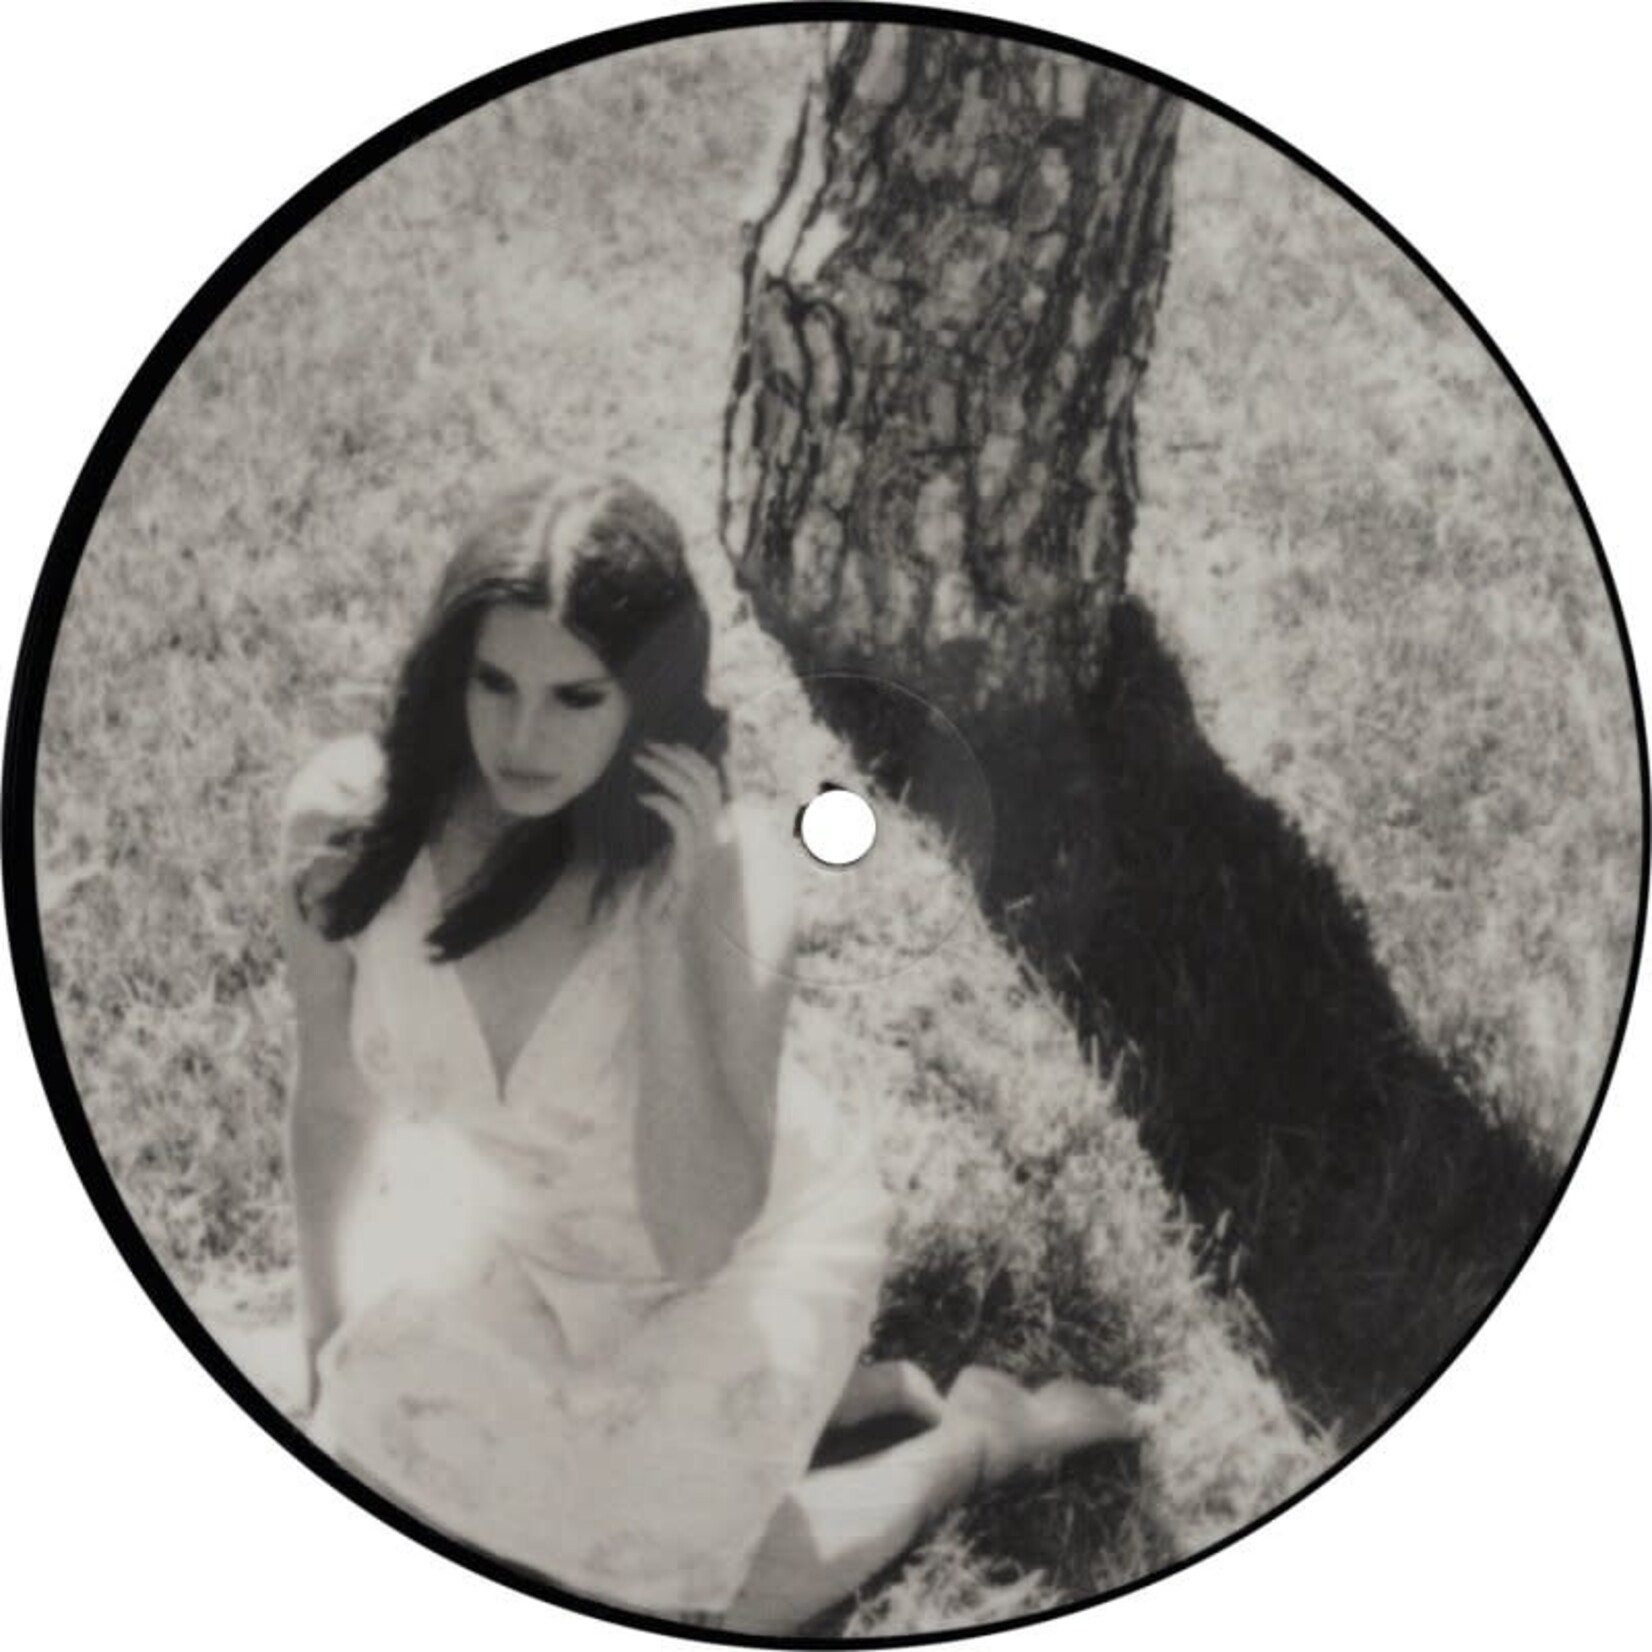 [New] Del Rey, Lana: Say Yes to Heaven (7", picture disc) [INTERSCOPE]